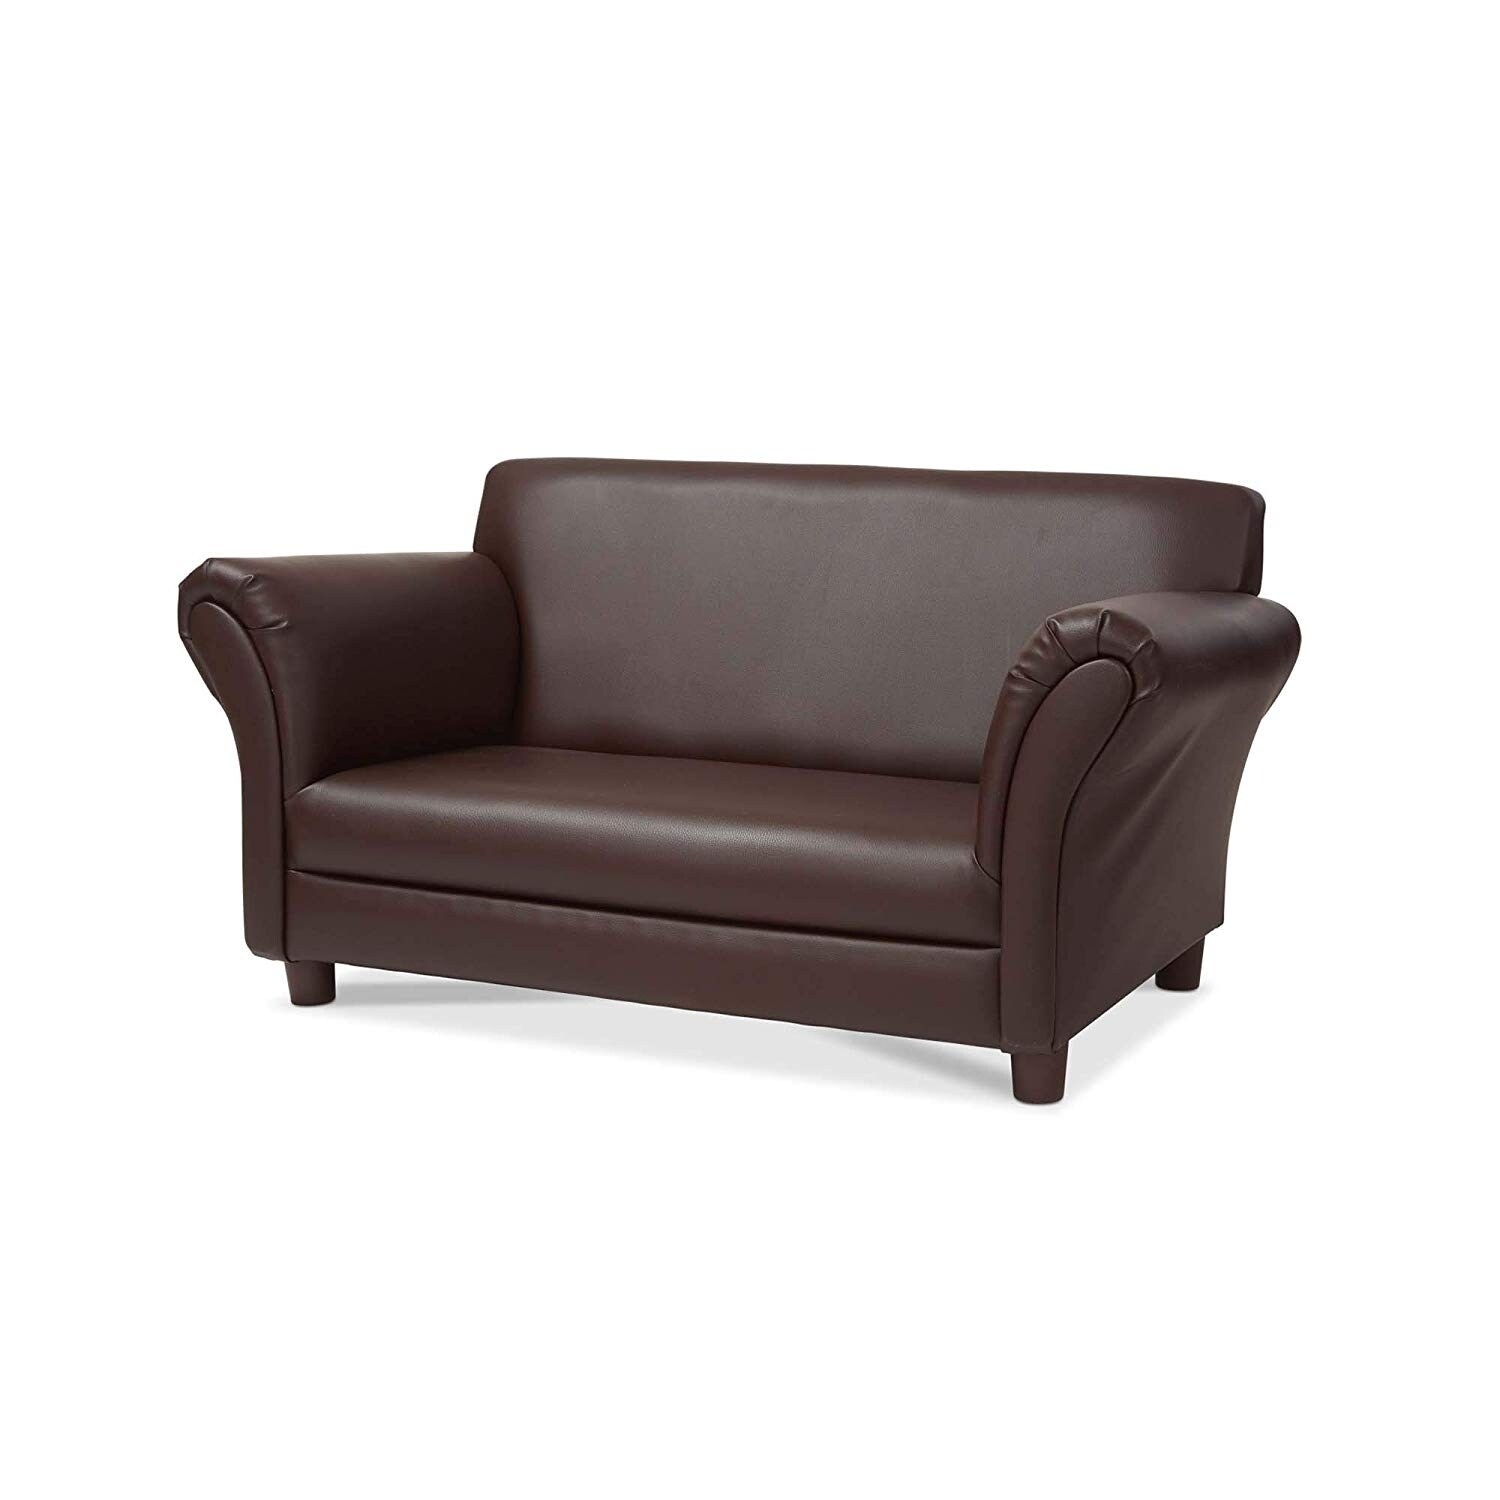 childrens leather couch